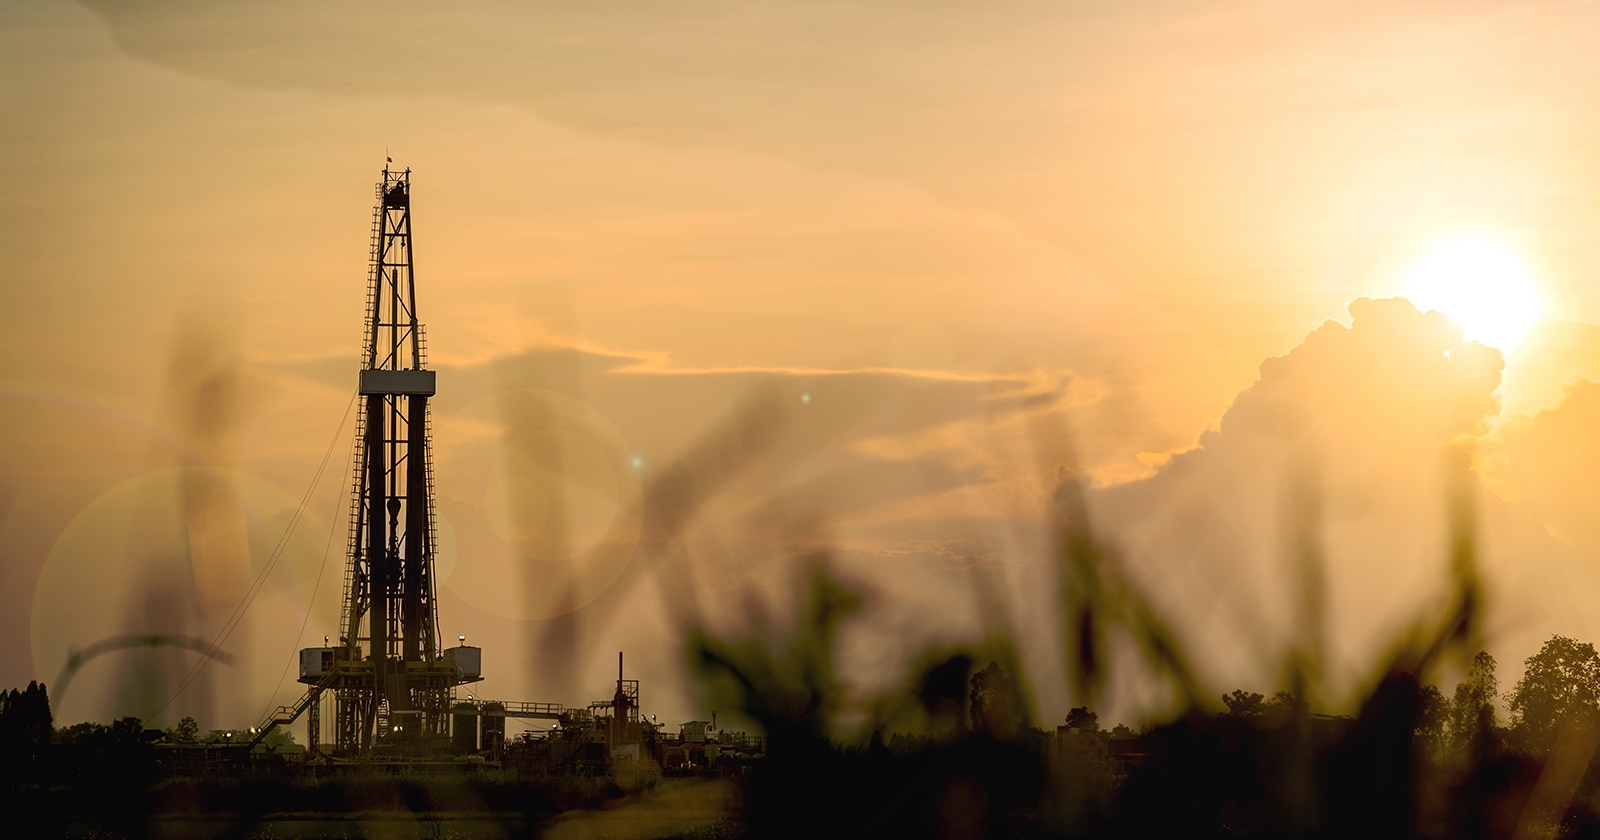 Oil derricks in the sunset and dust. Exponent environmental engineers help clients analyze risk and project costs. 